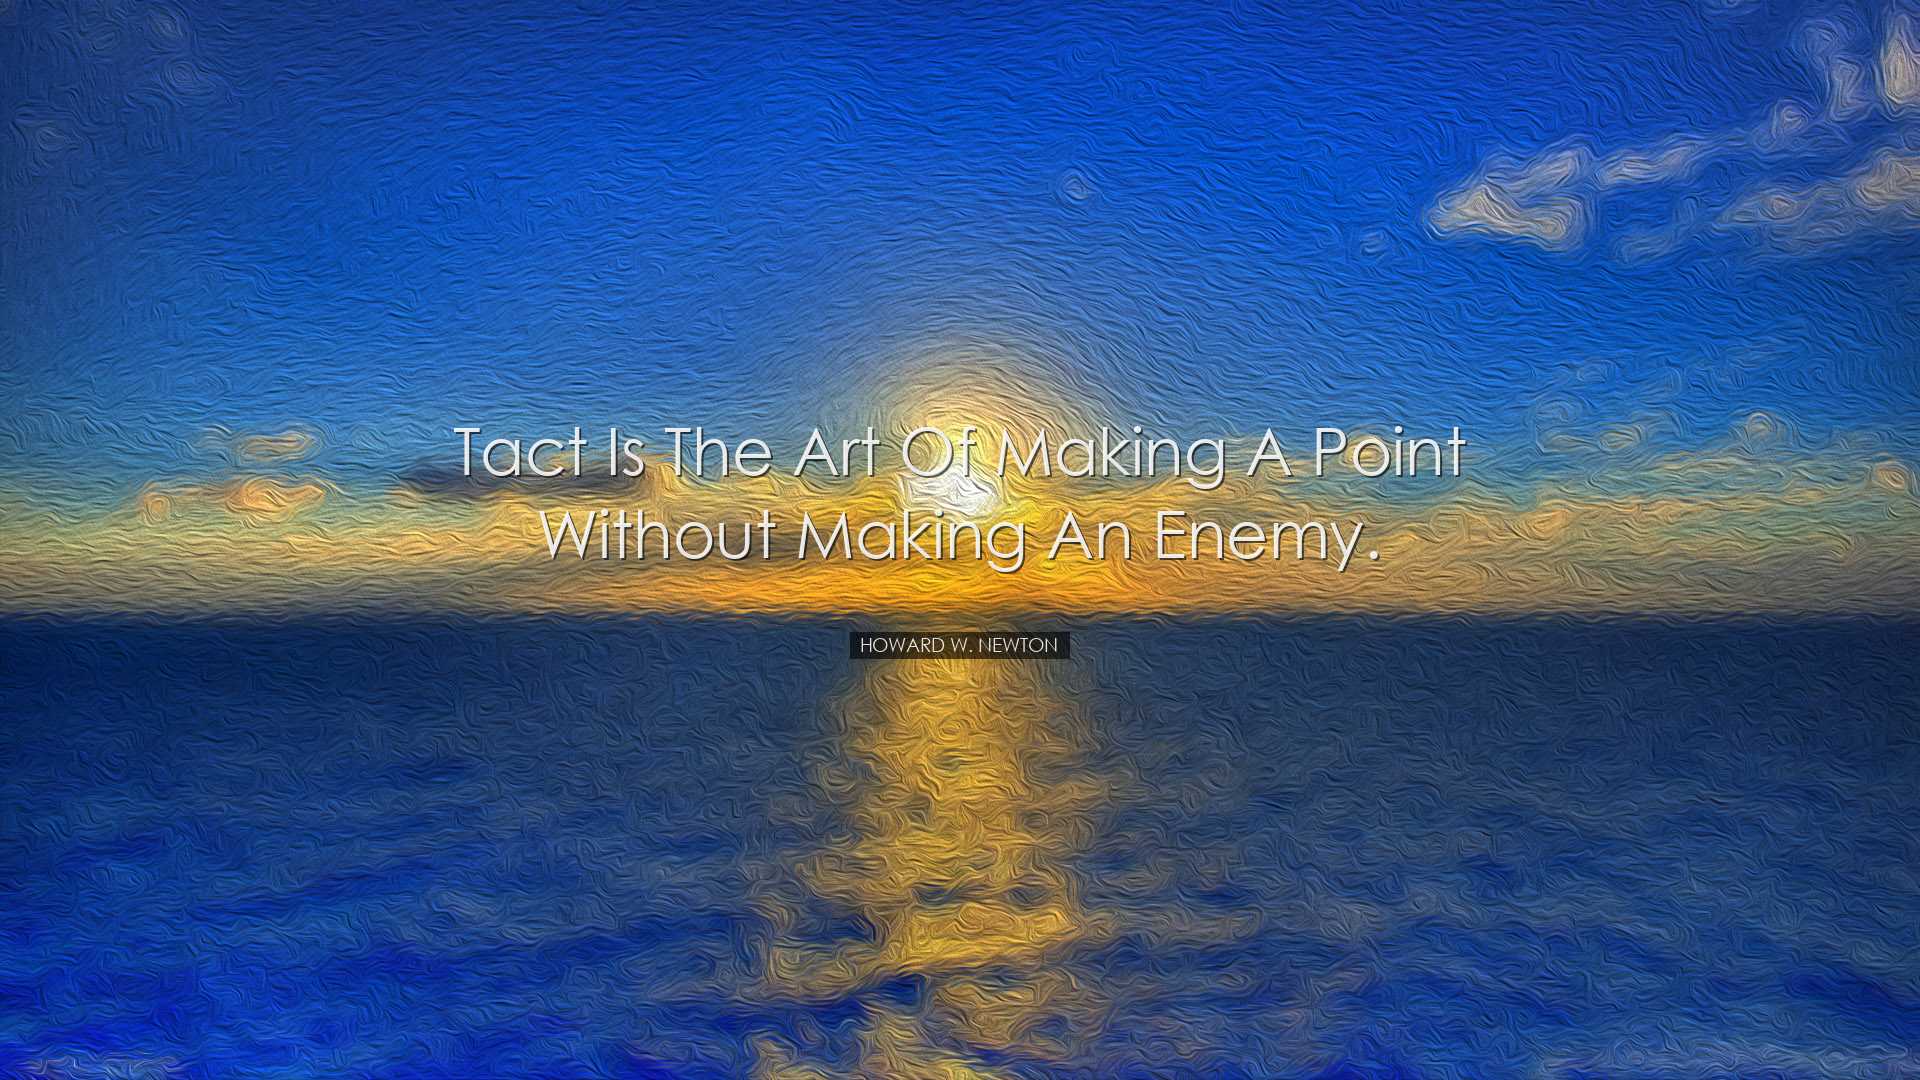 Tact is the art of making a point without making an enemy. - Howar